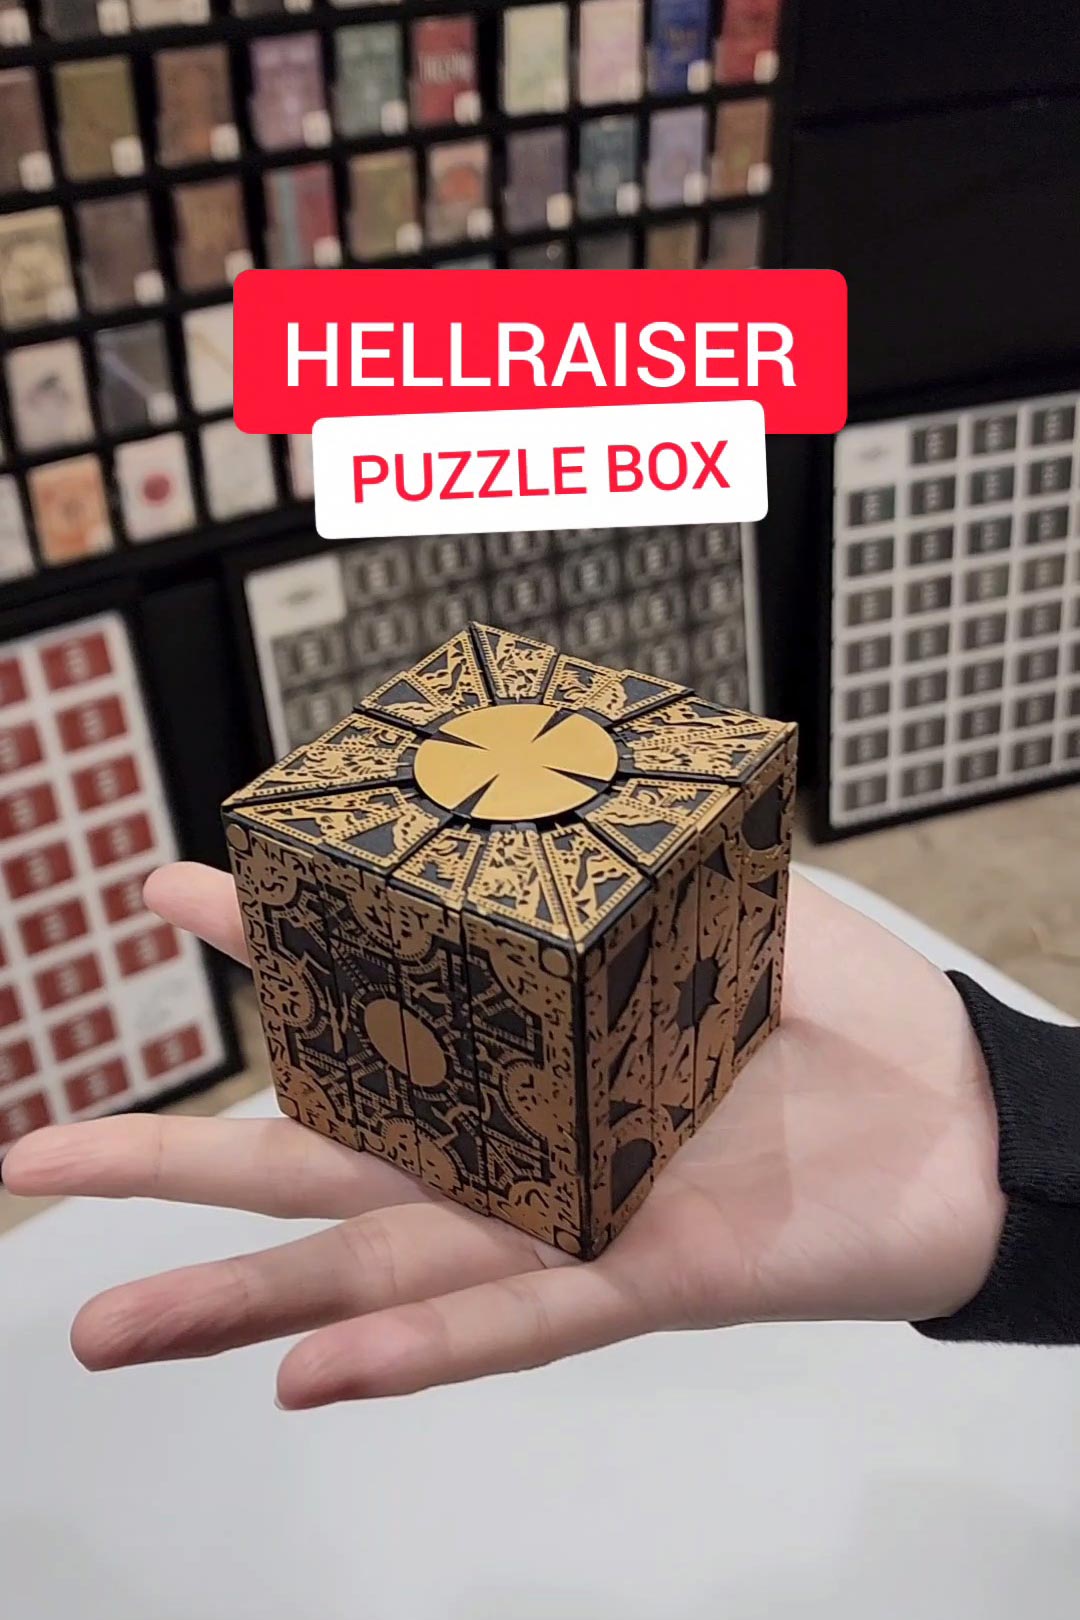 We got a Hellraiser Box so you don't have to